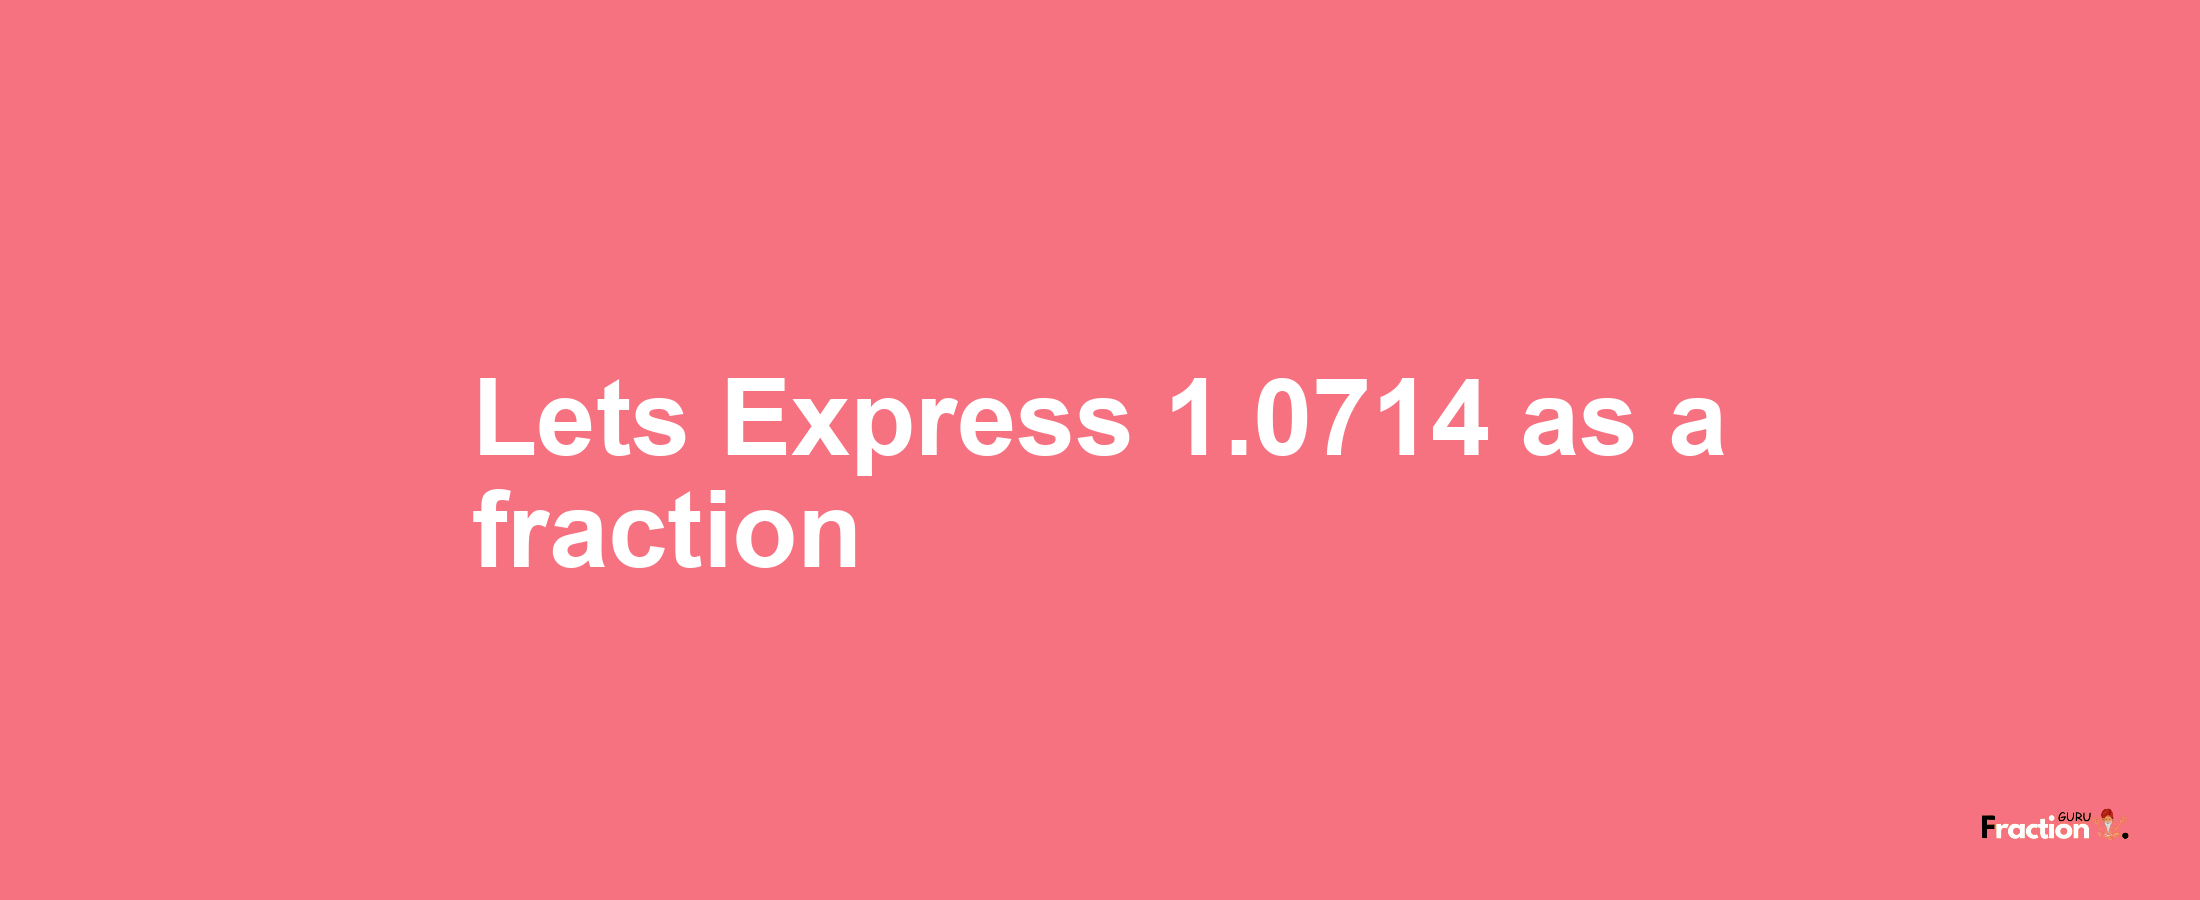 Lets Express 1.0714 as afraction